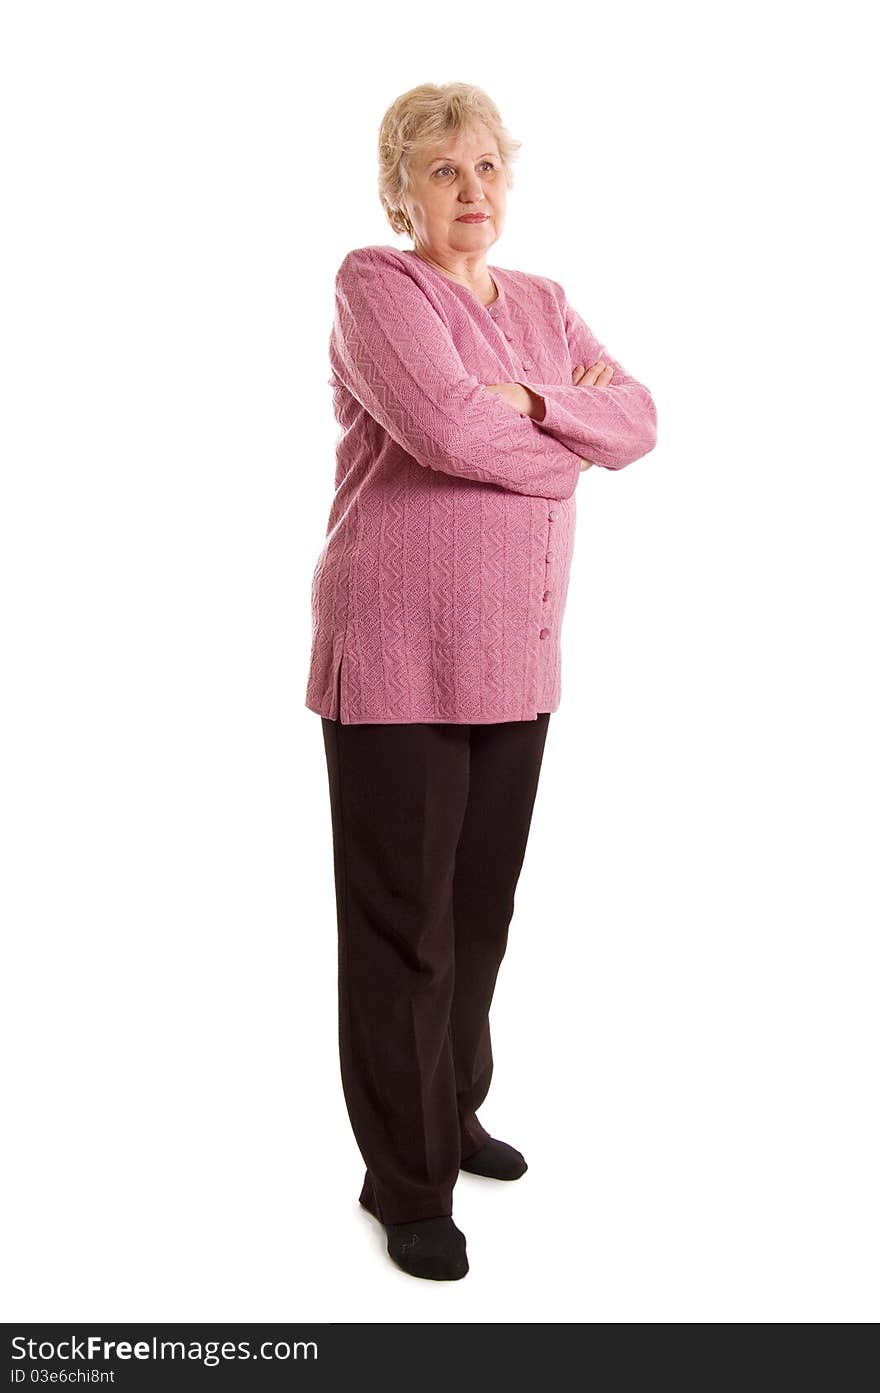 The elderly woman on white background